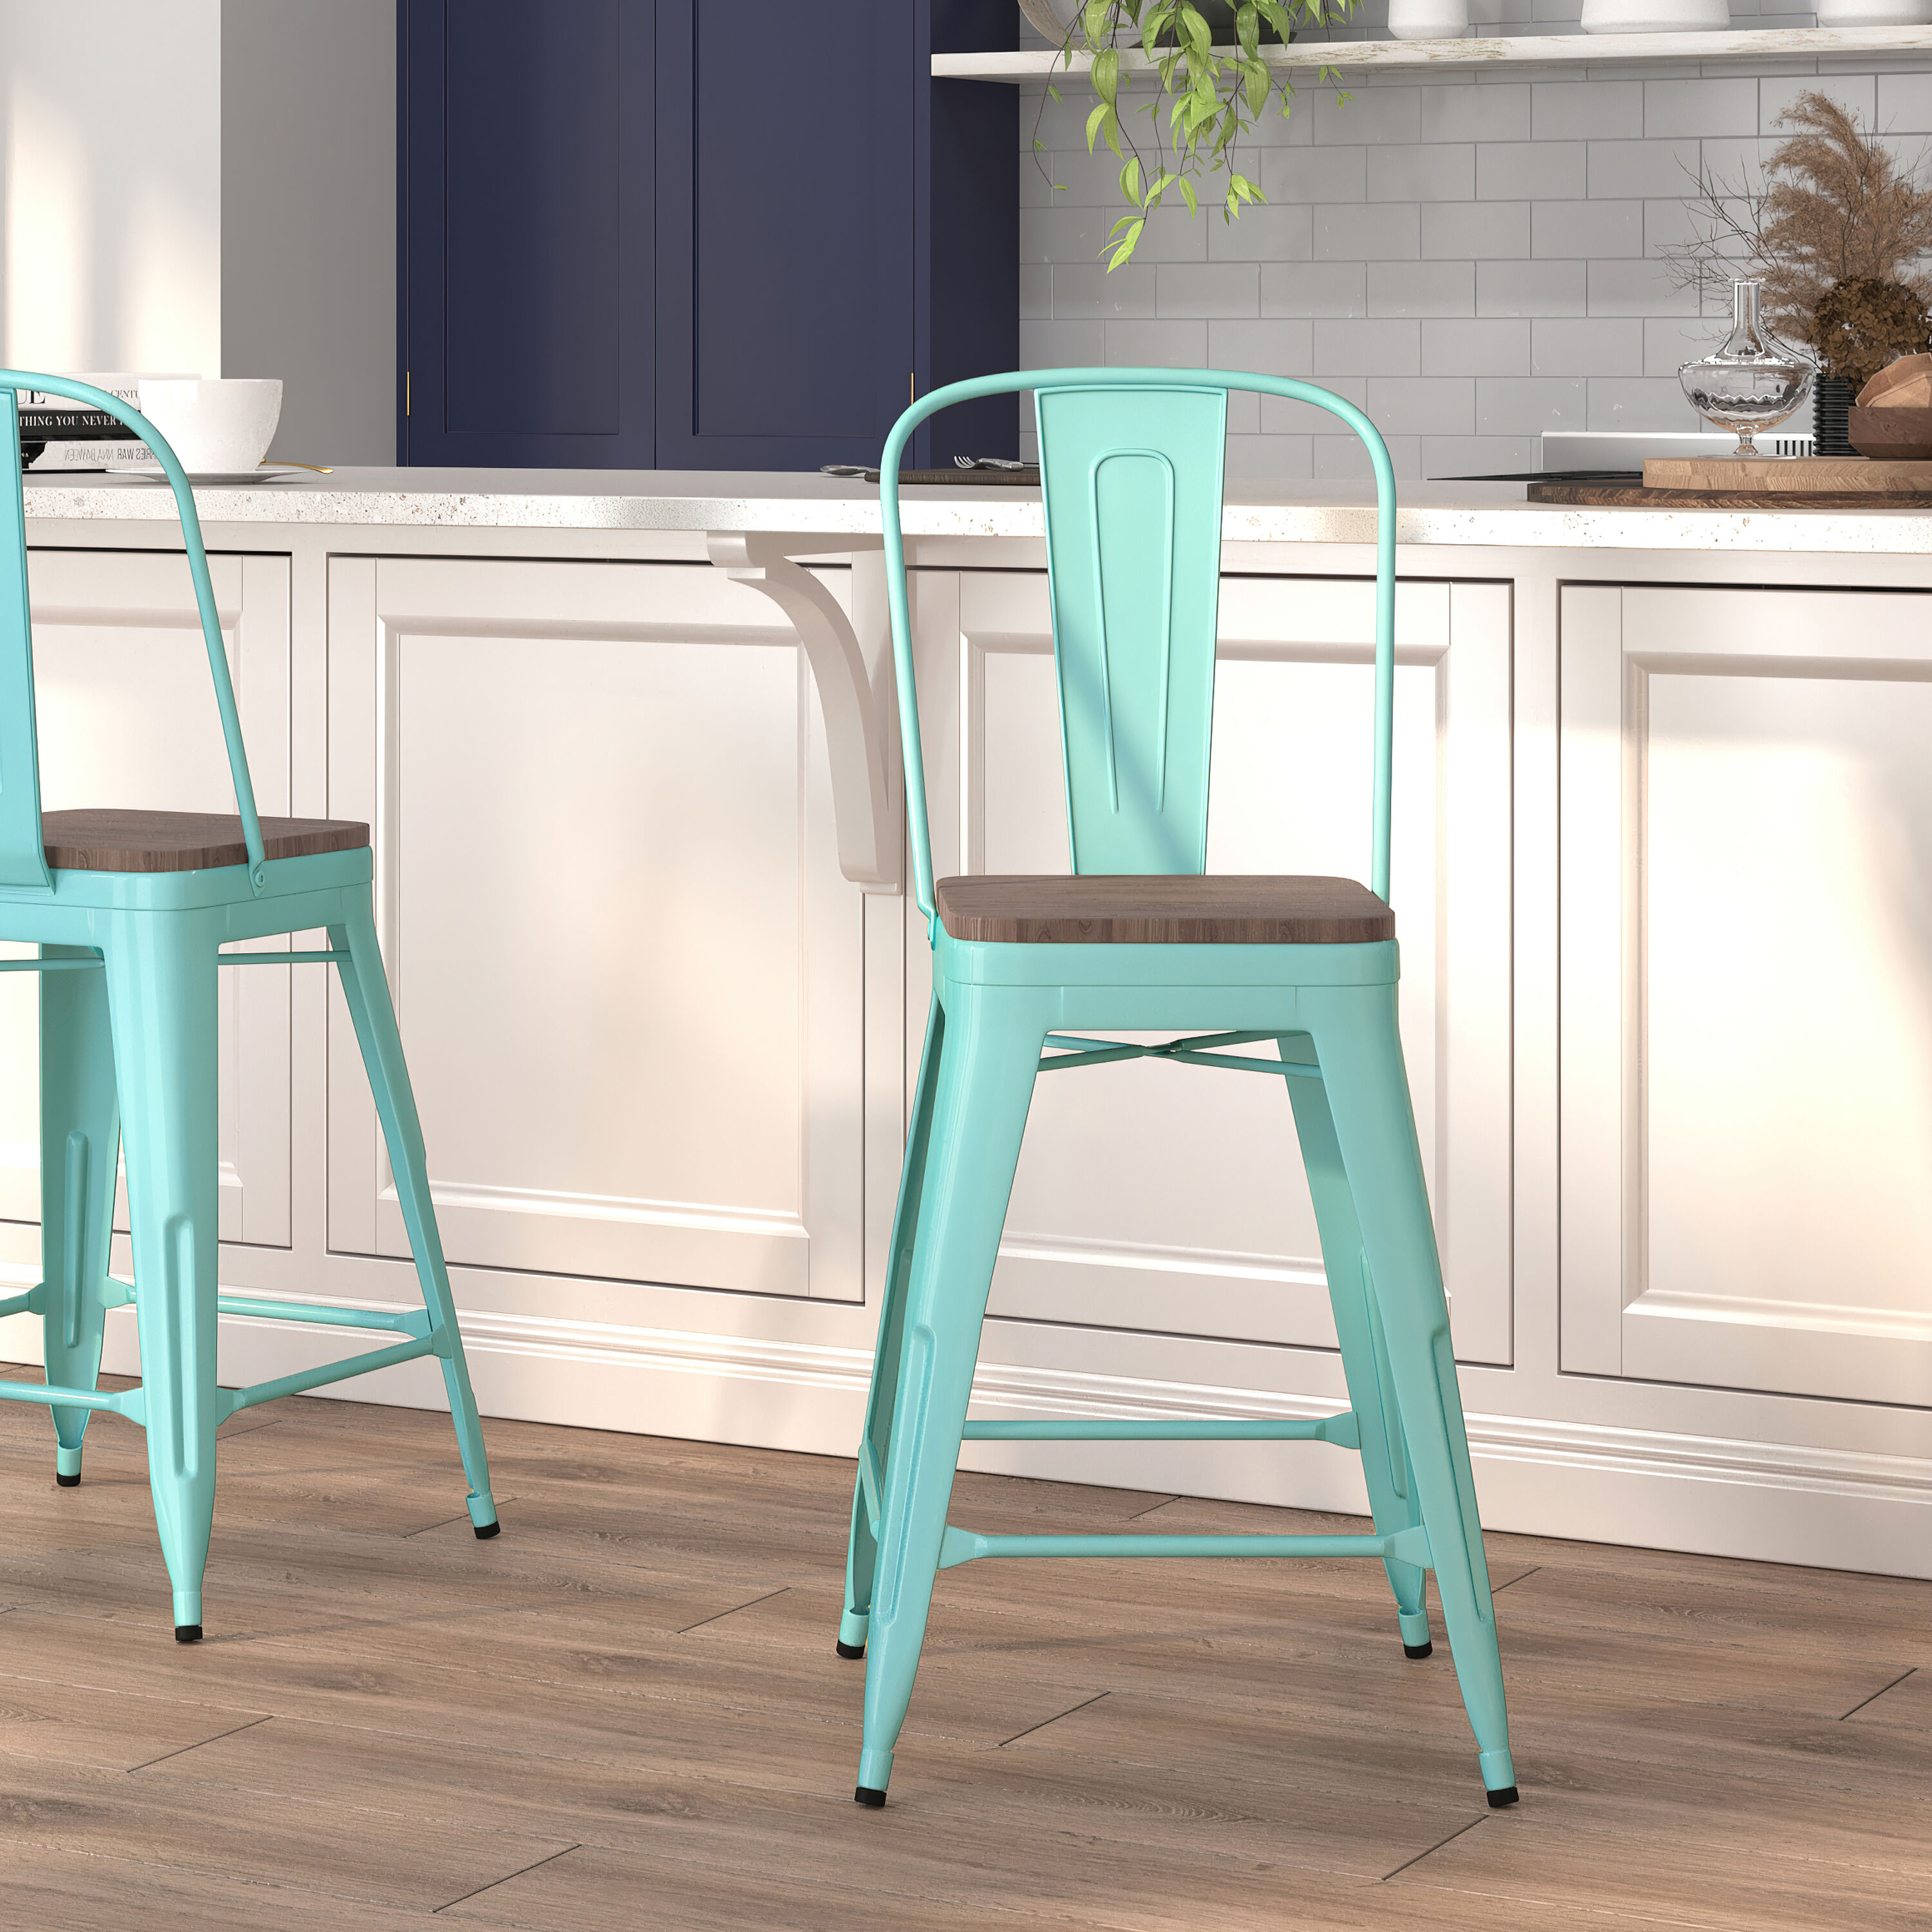 Mint Green Desk Cabinets with Sleek Black Stool - Contemporary - Kitchen